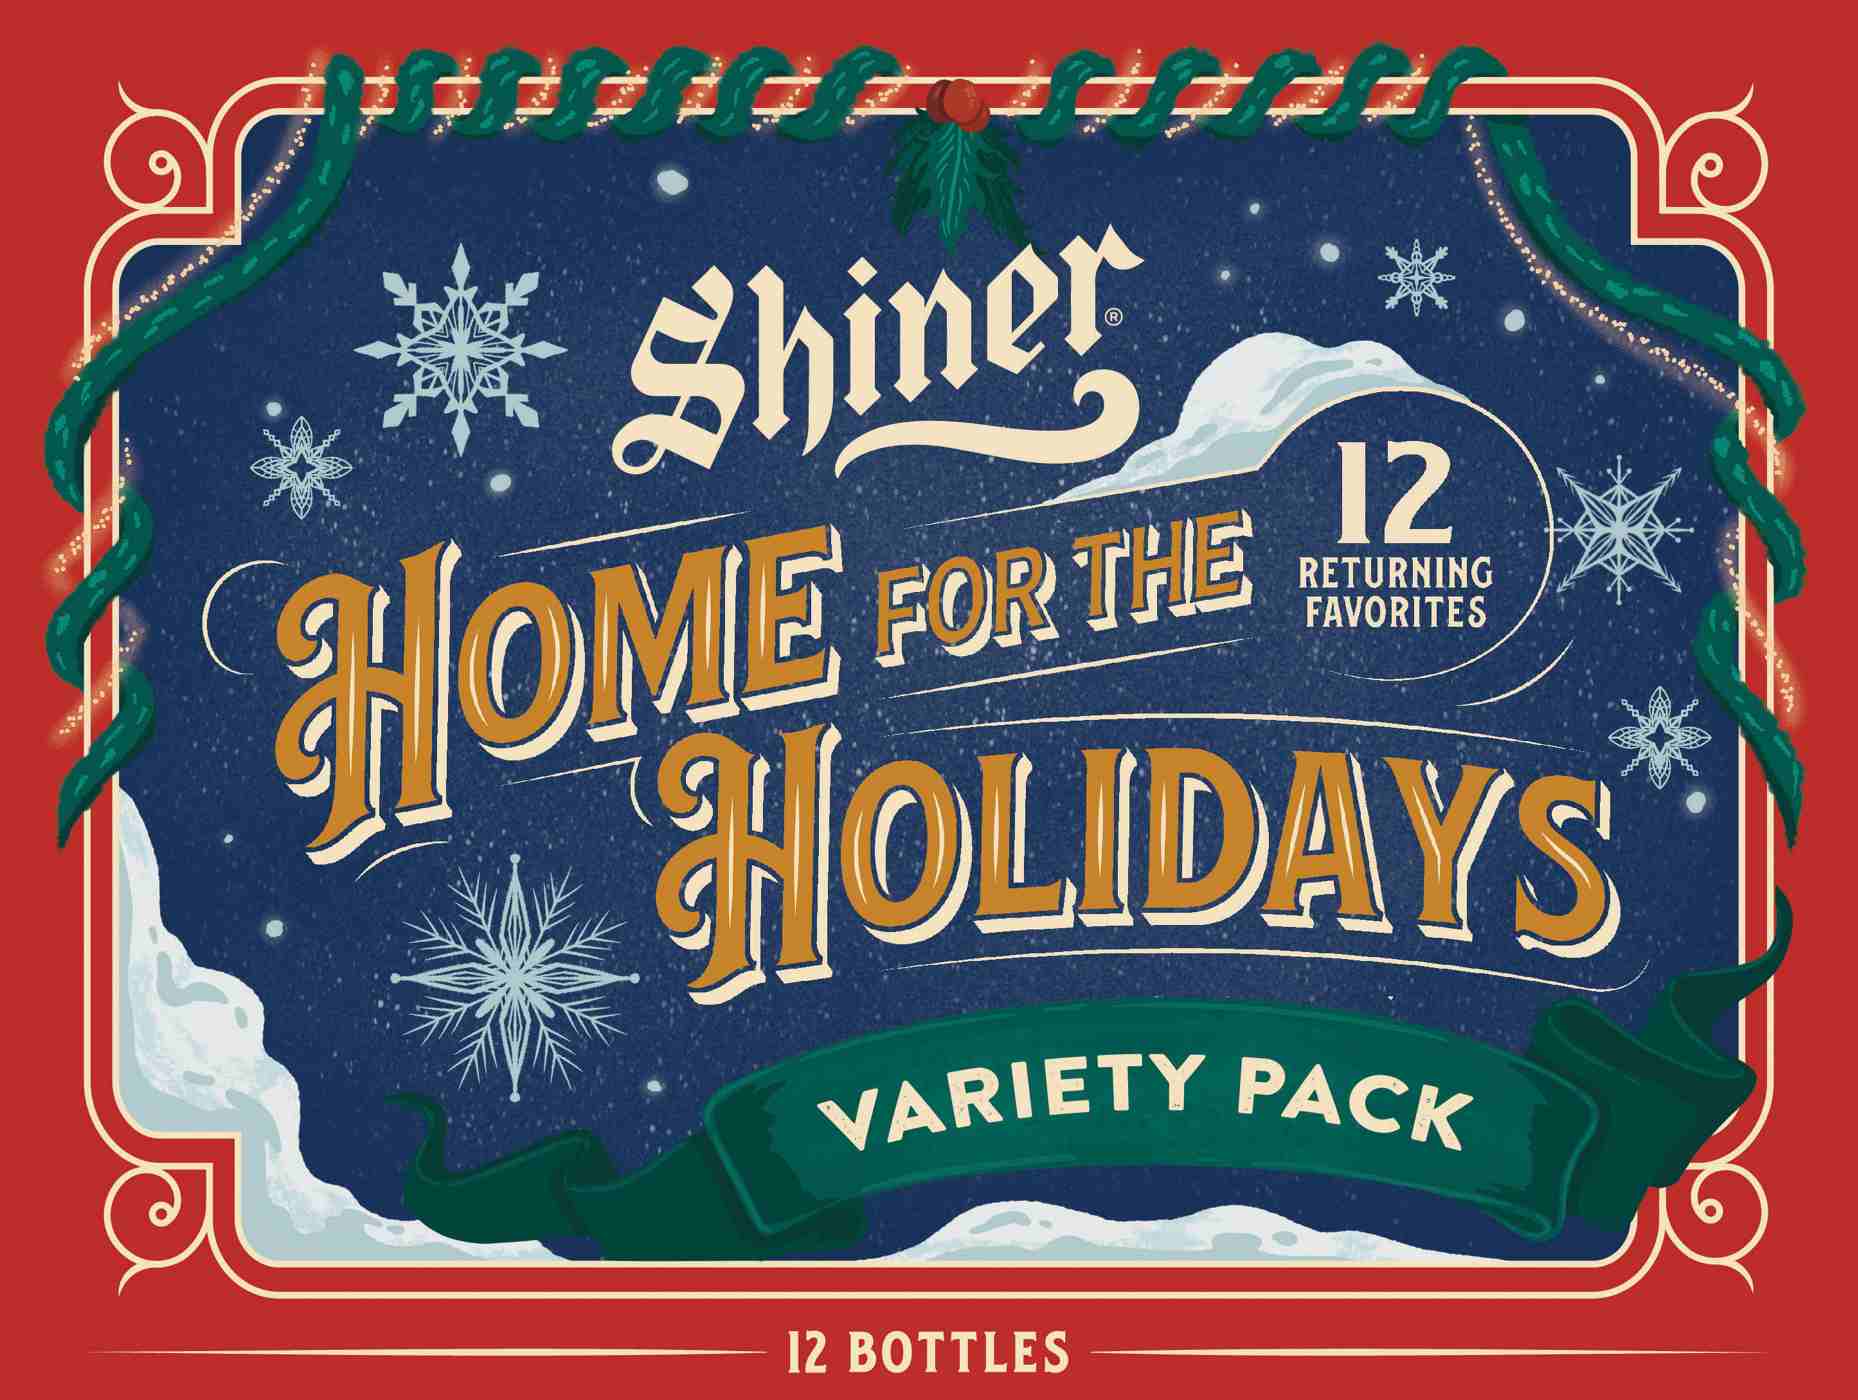 Shiner Home for The Holidays Variety Pack Beer 12 pk Bottles; image 1 of 2